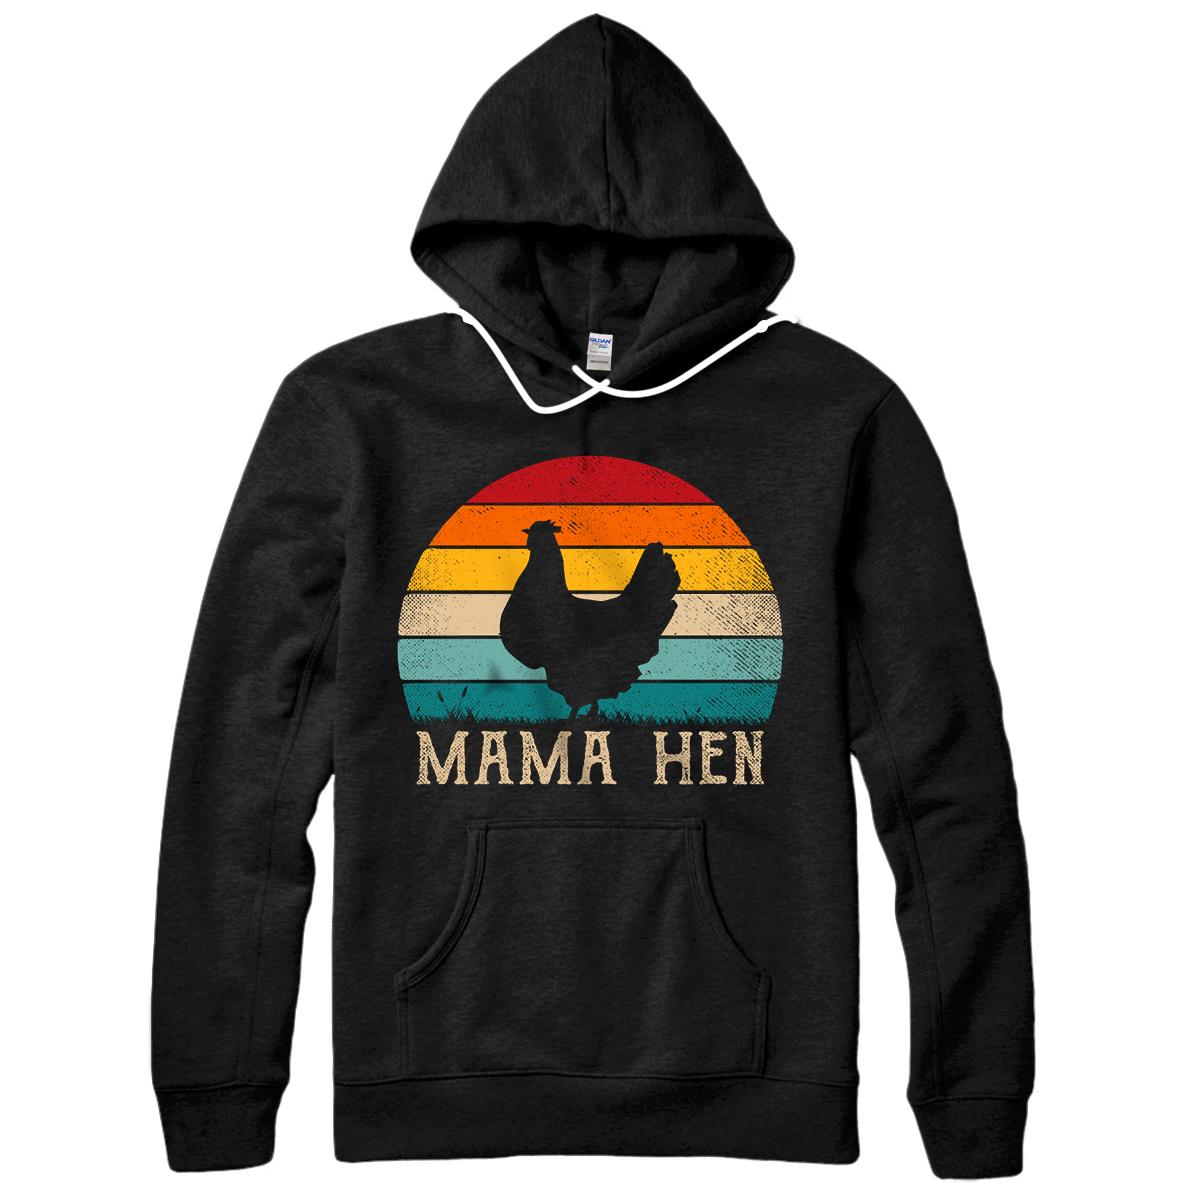 Personalized Funny Mama Hen Apparel 80s Vintage Retro Chicken Mom Mother Pullover Hoodie